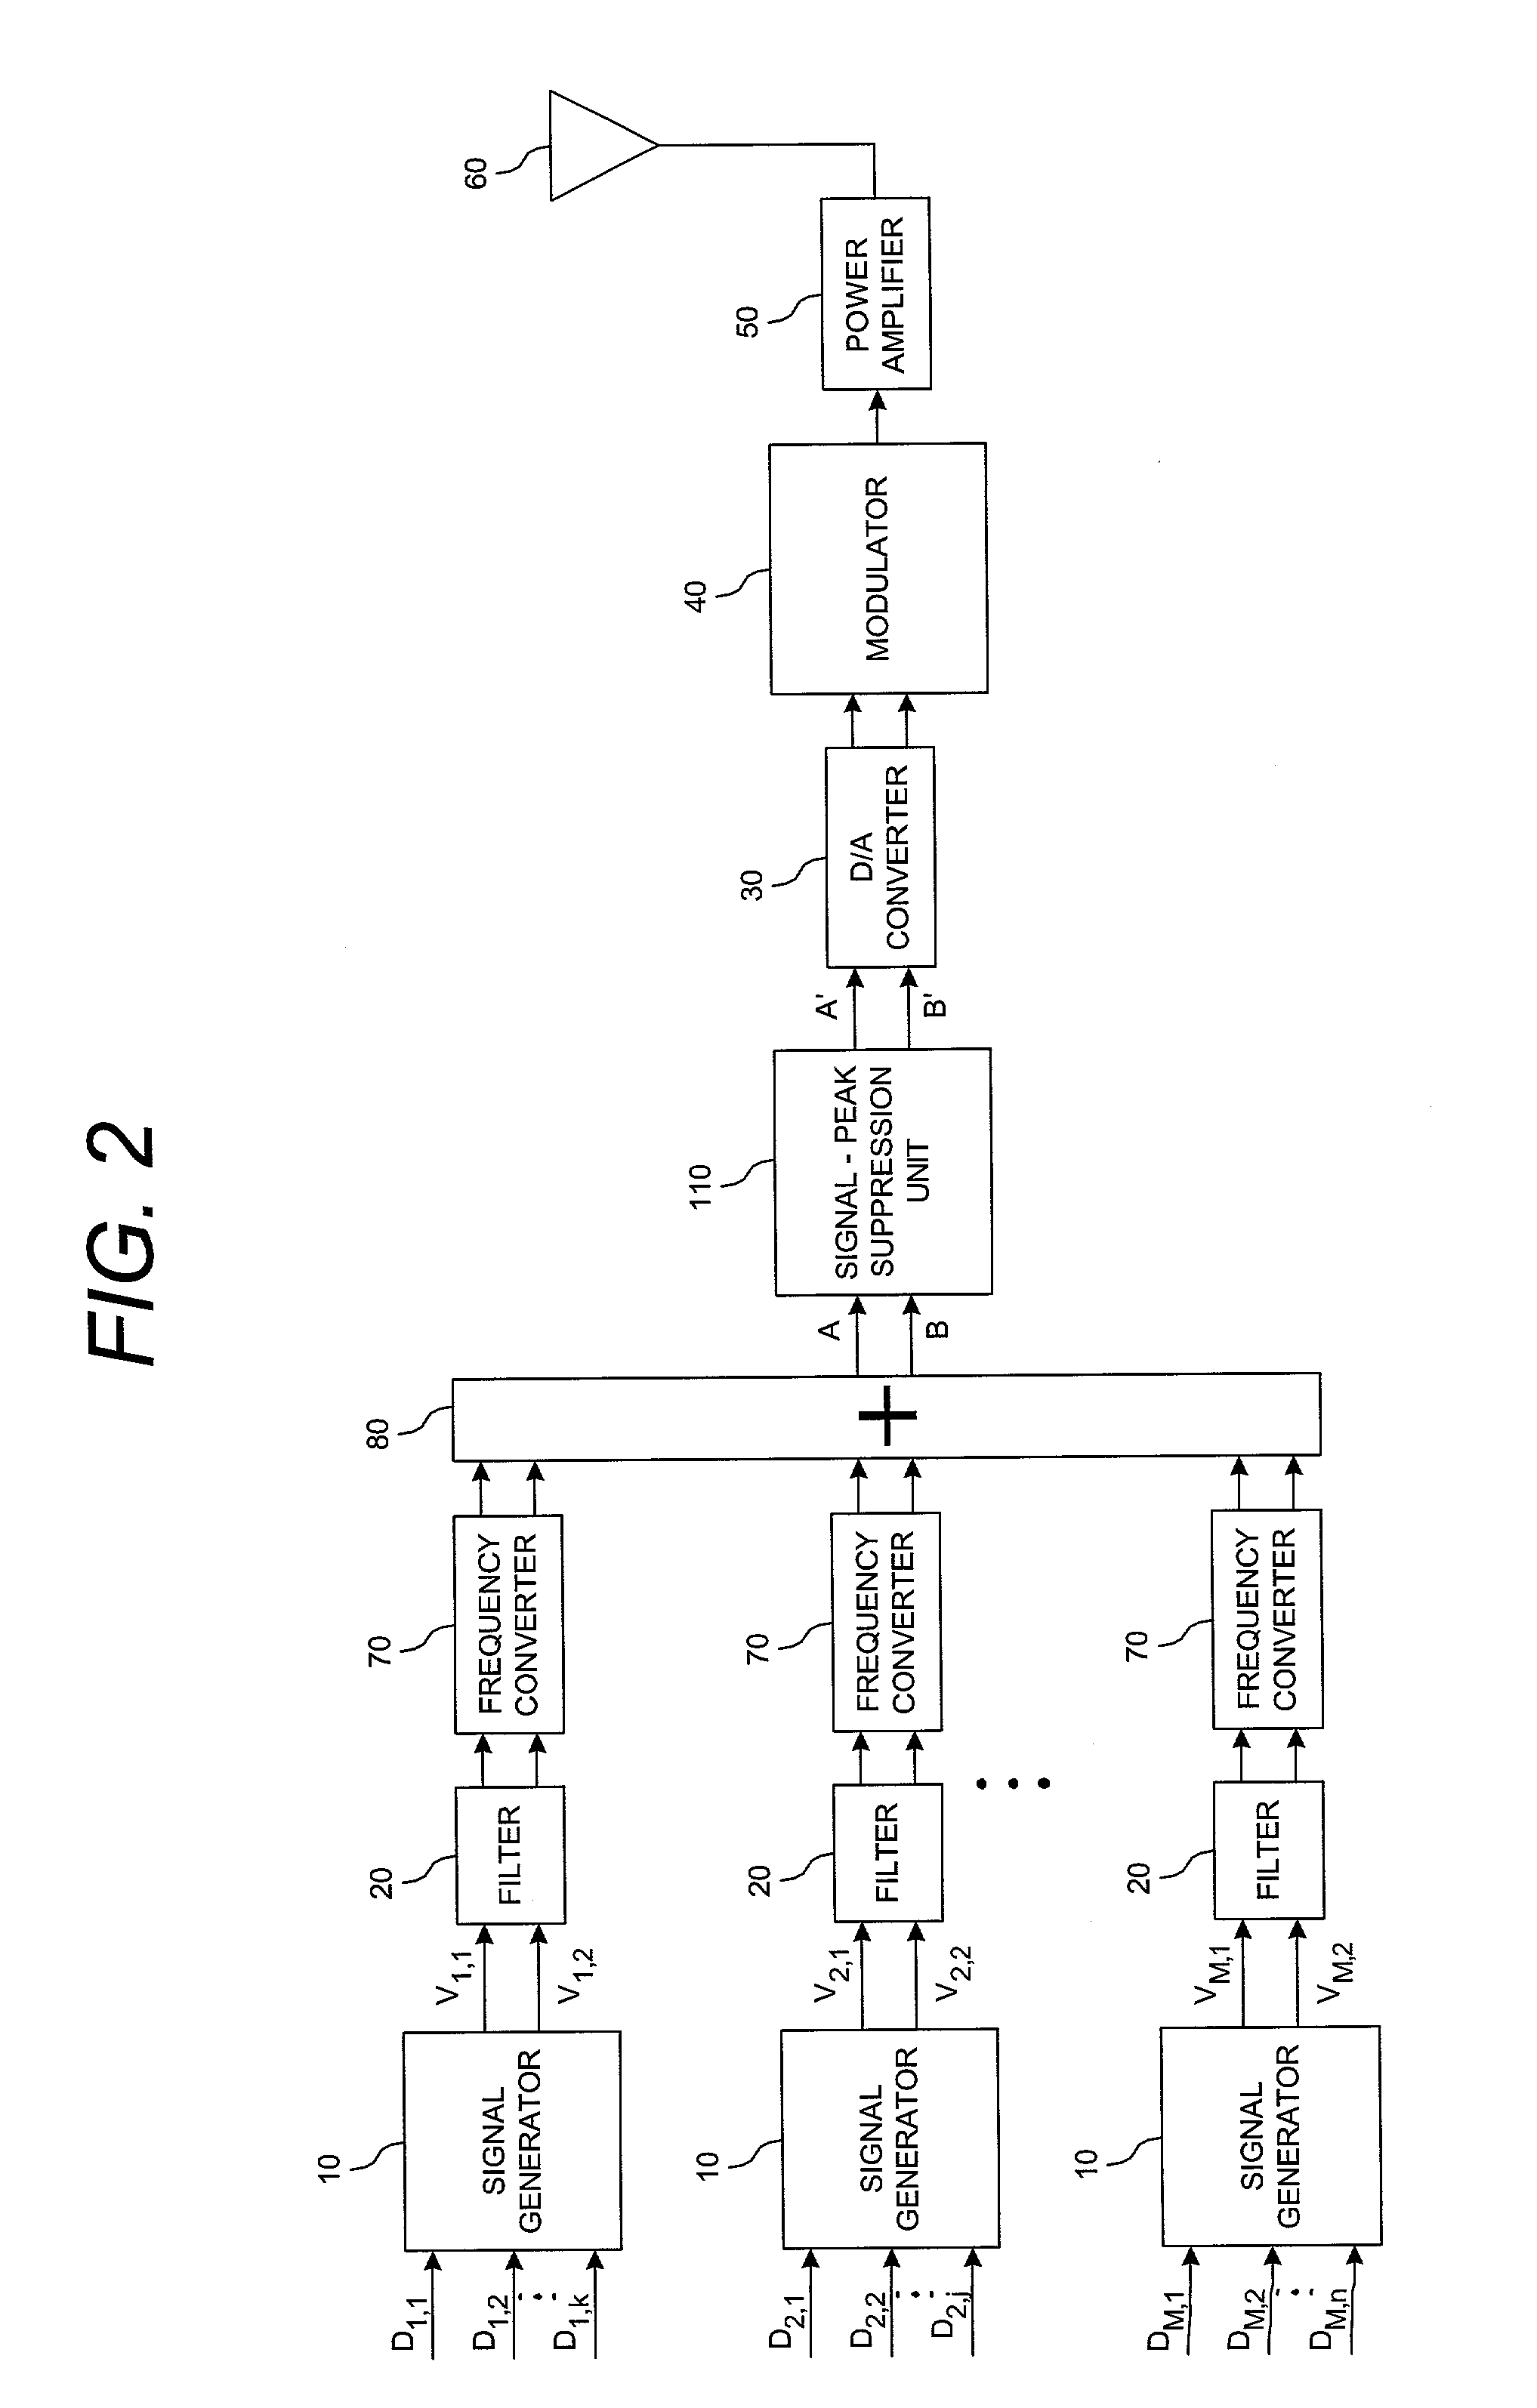 System and method for post filtering peak power reduction in multi-carrier communications systems